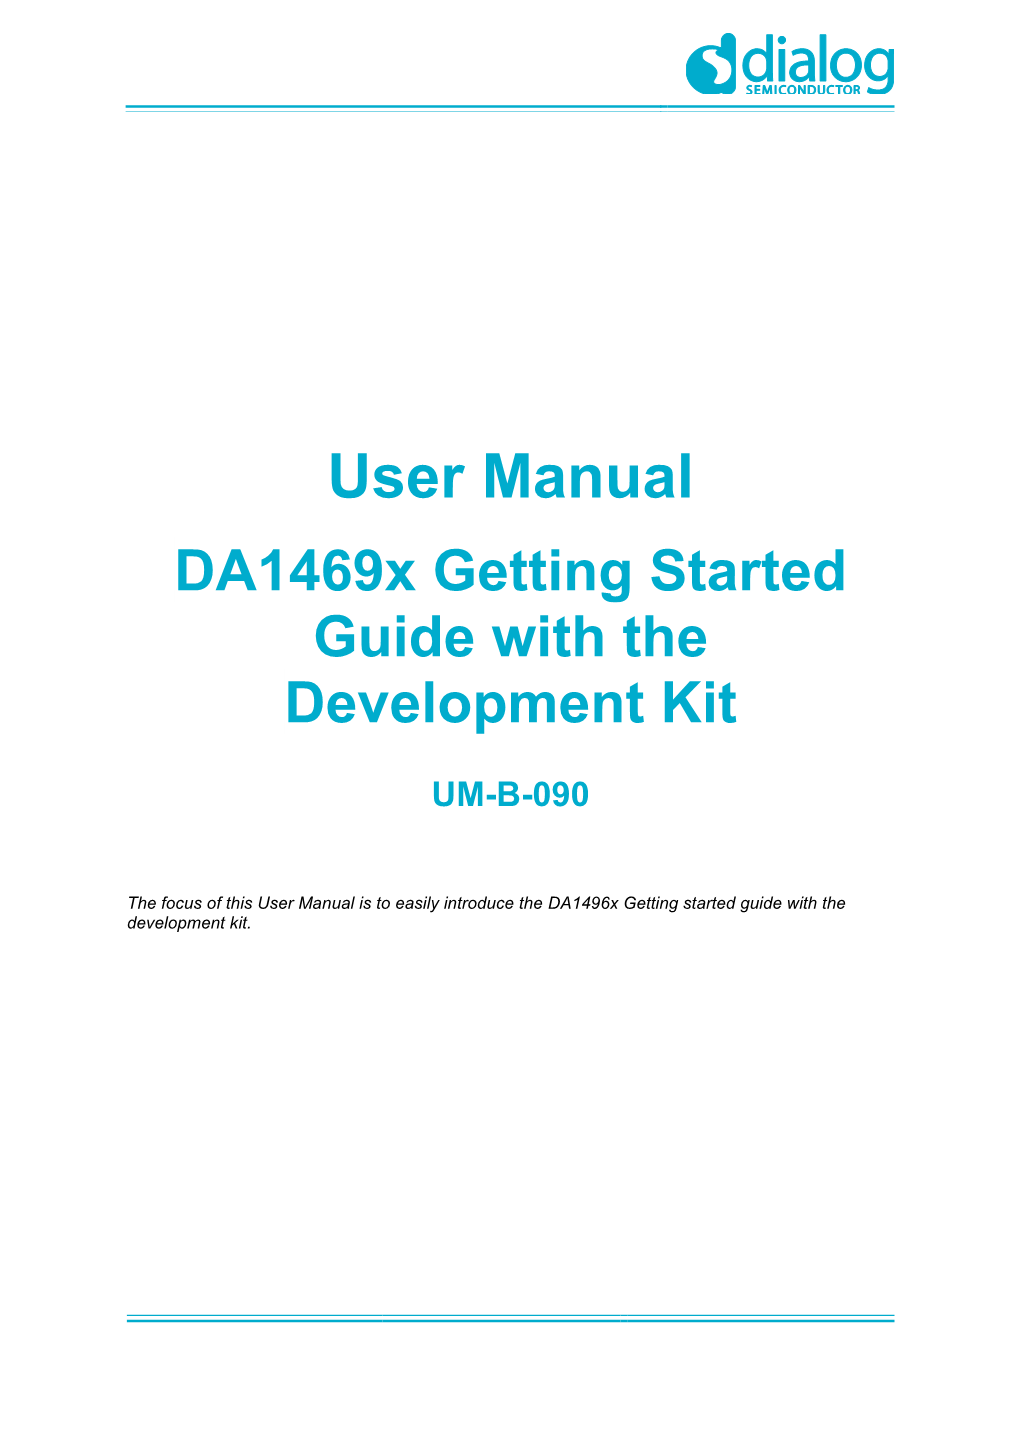 Da1469x Getting Started Guide with the Development Kit